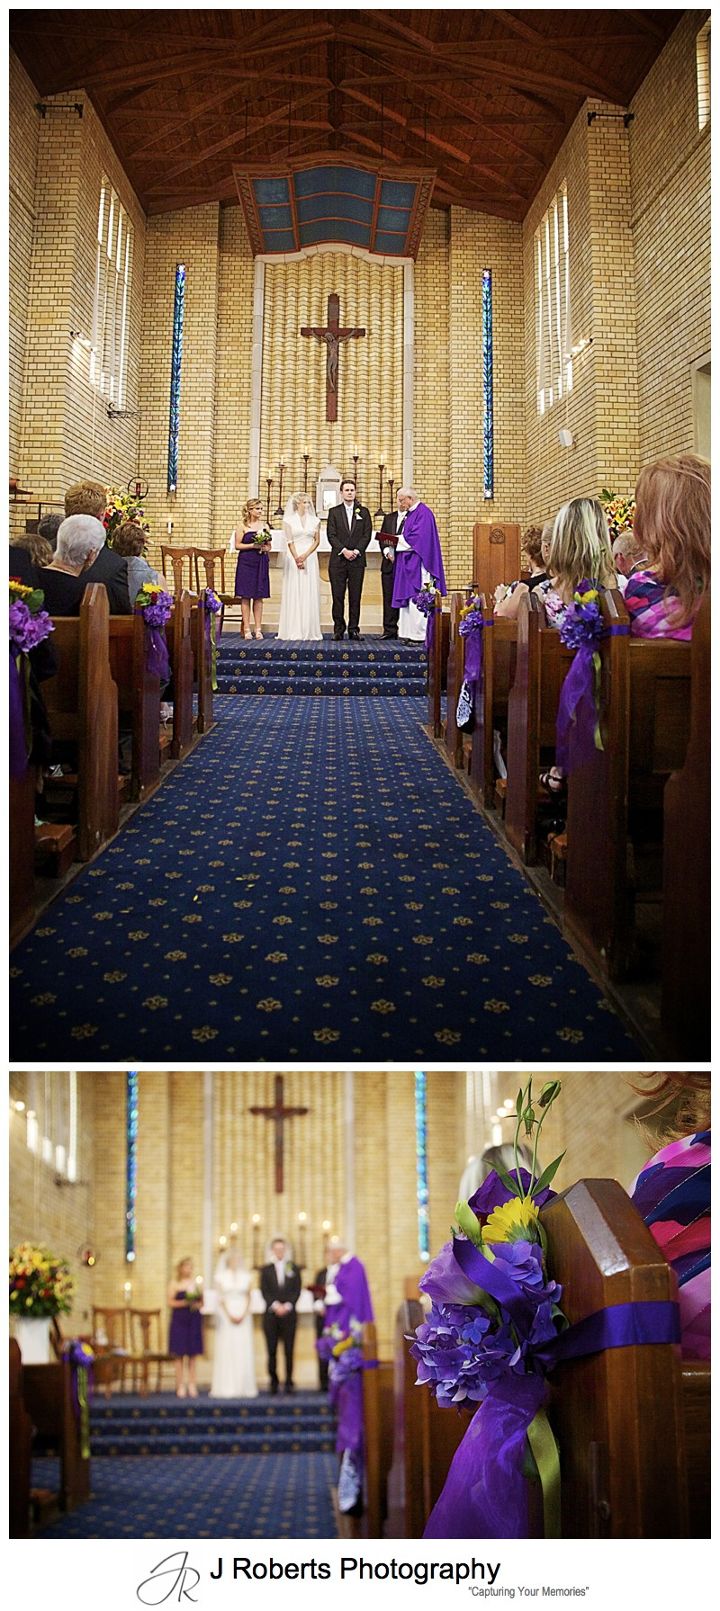 Bride and groom at end of decorated church aisle - wedding photography sydney